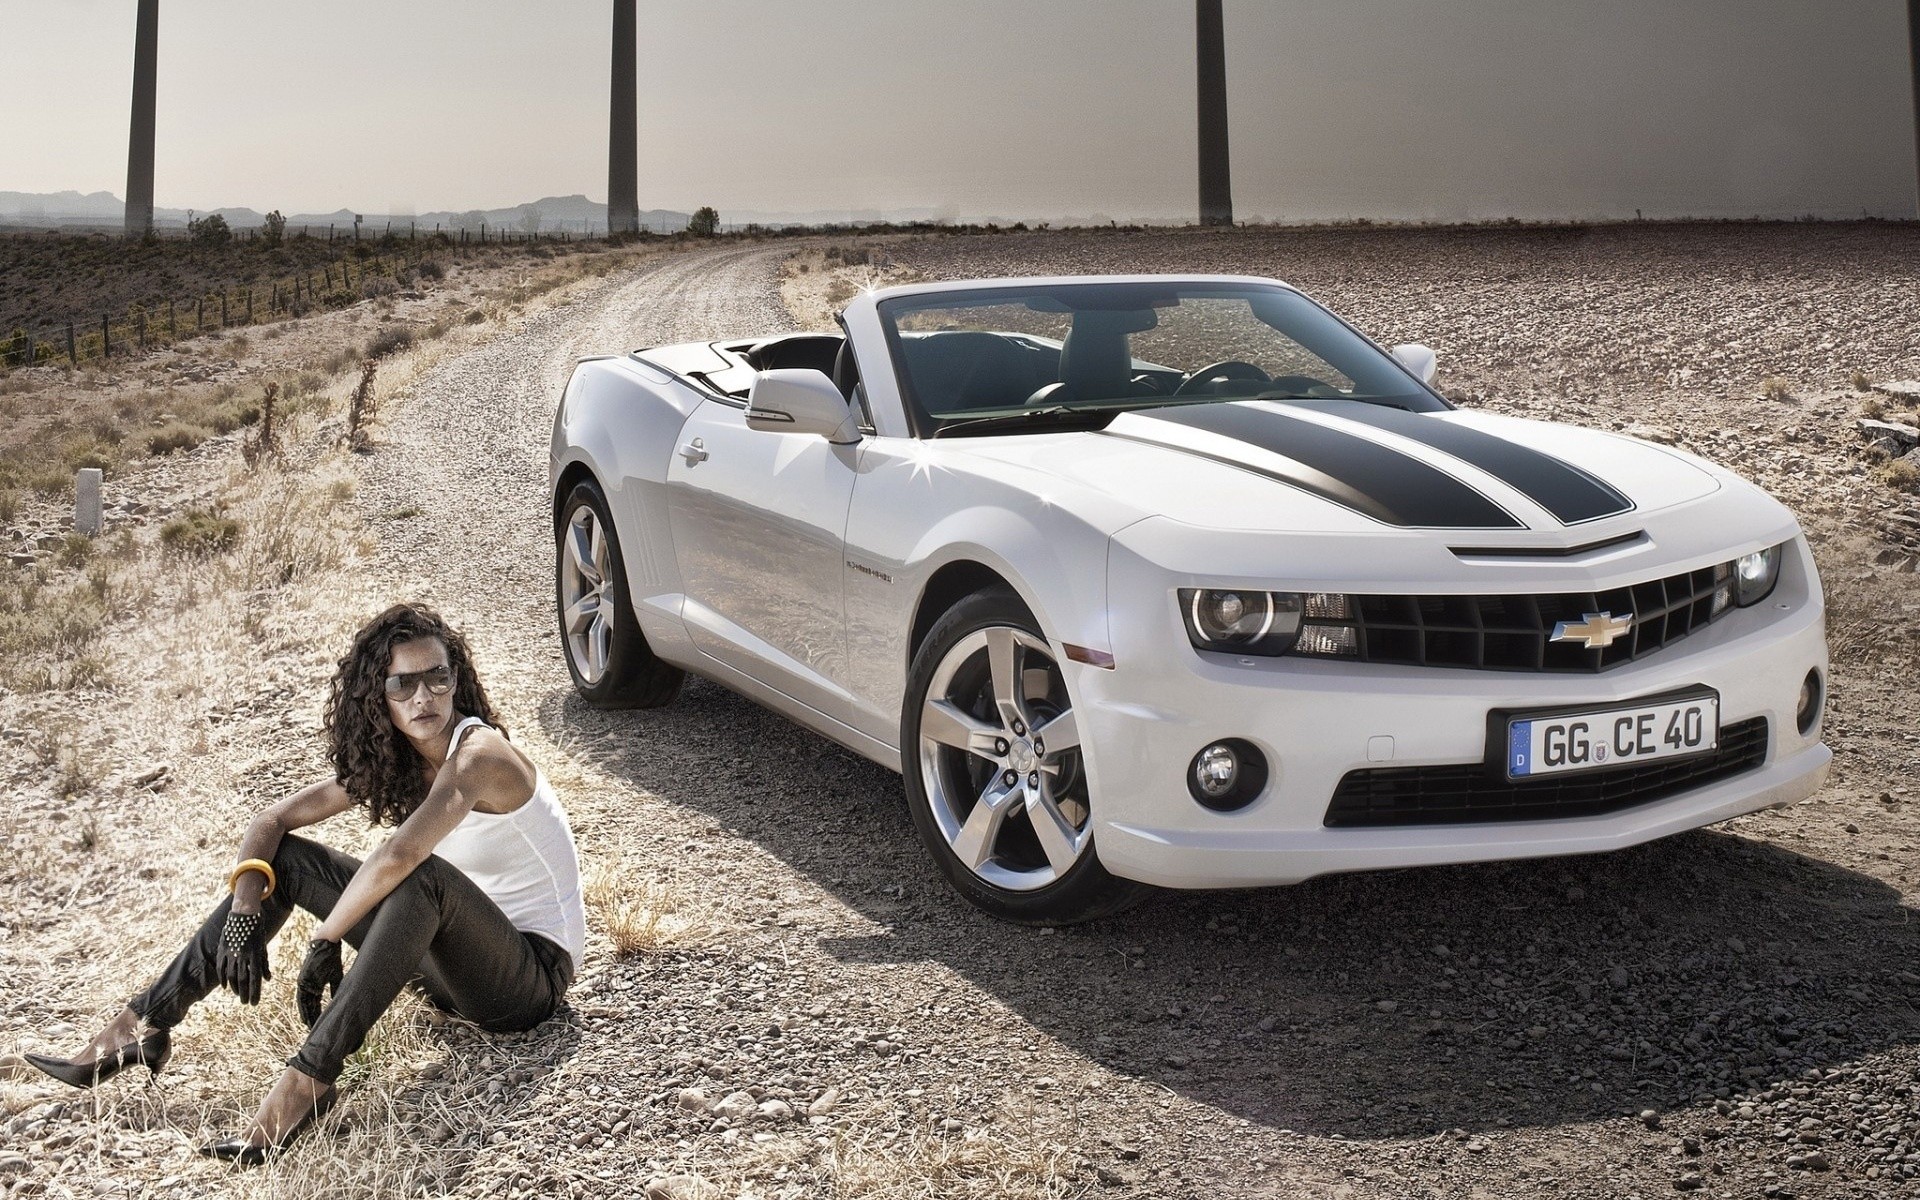 Brunettes Desert Muscle Cars Roads Chevrolet Camaro Chevrolet Camaro Ss Cabrio Wallpapers Hd Desktop And Mobile Backgrounds